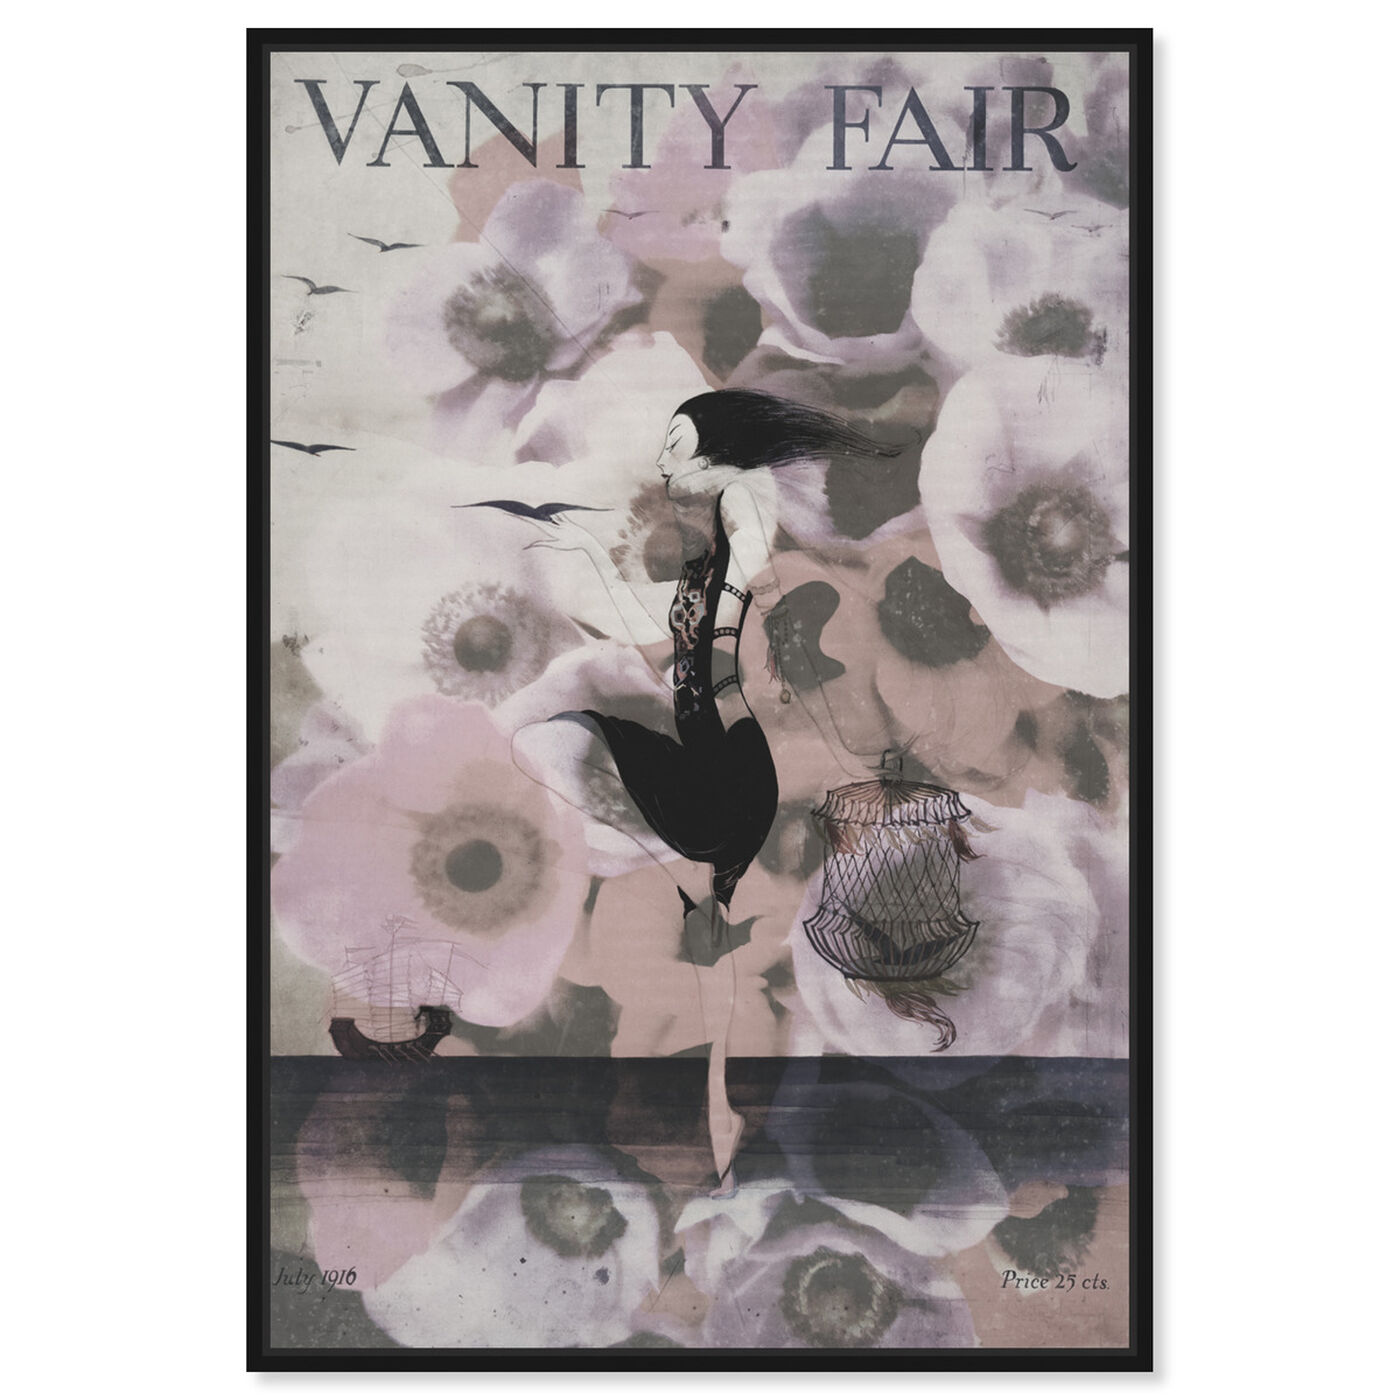 Front view of Vanity Fair featuring advertising and publications art.